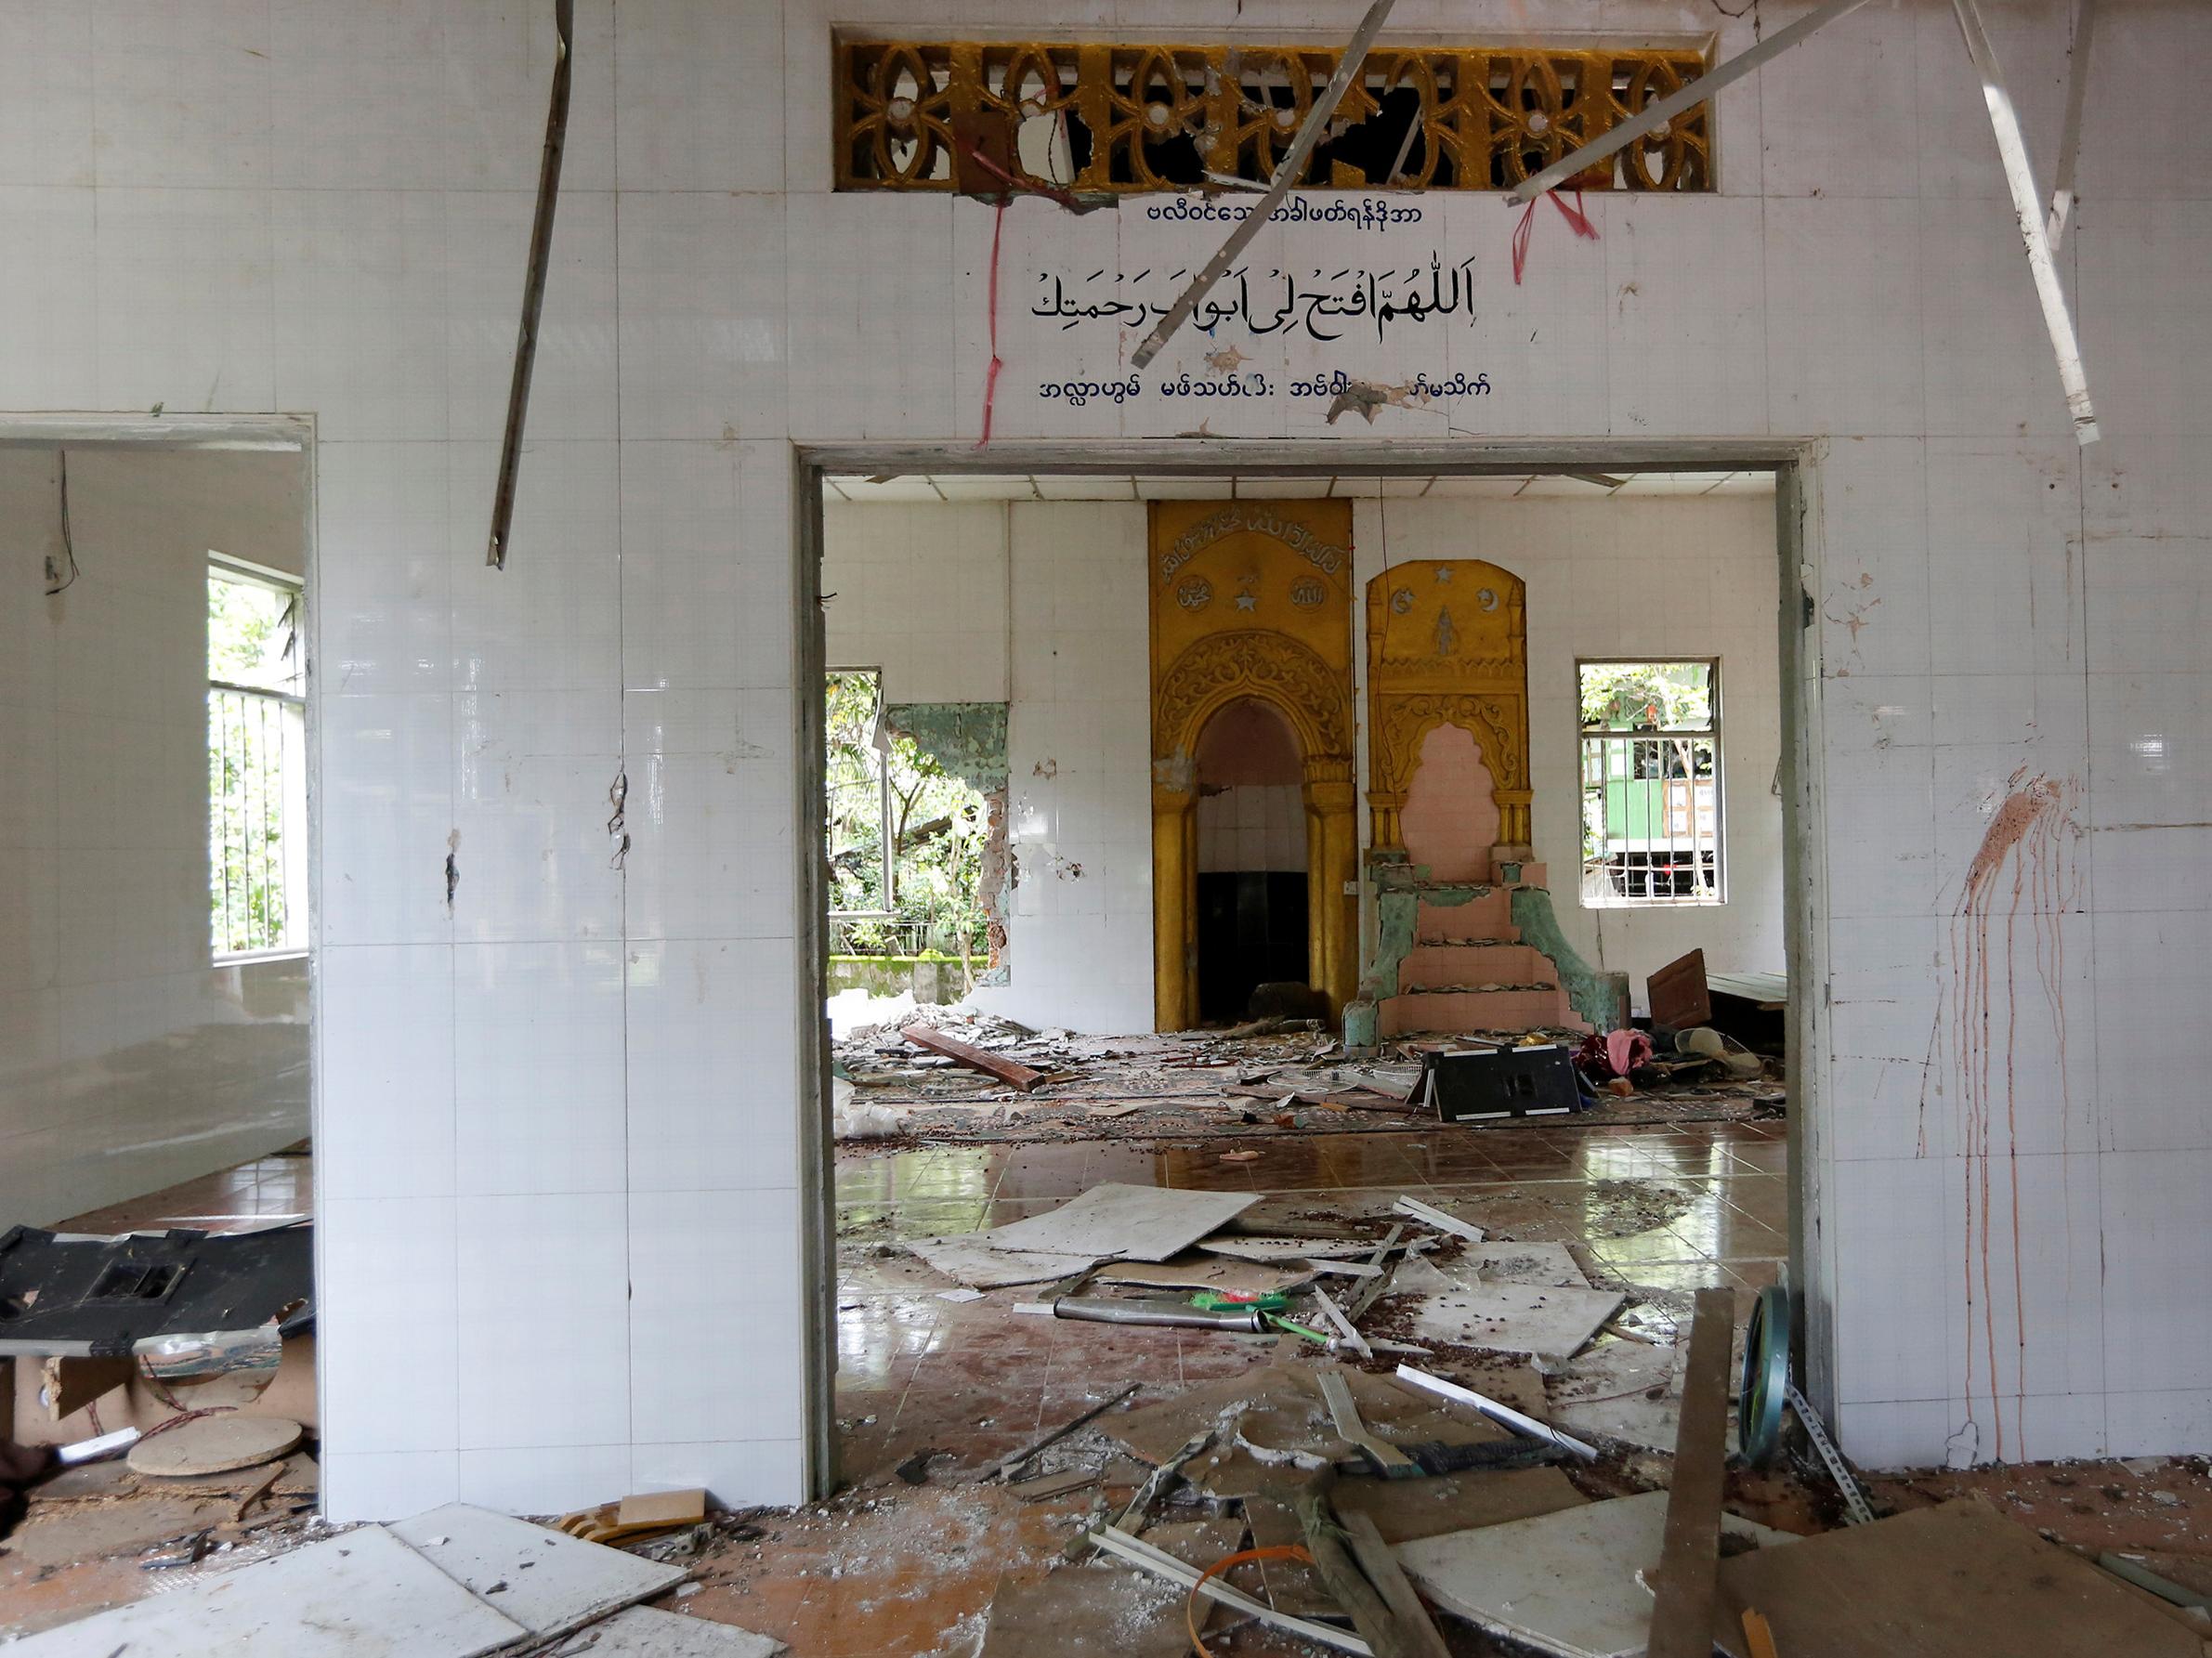 The interior of a mosque destroyed by a group of men on 23 June in a Thayethamin, central Burma. A second Muslim prayer hall has been attacked in the north of the country amid a spike in inter-religious violence